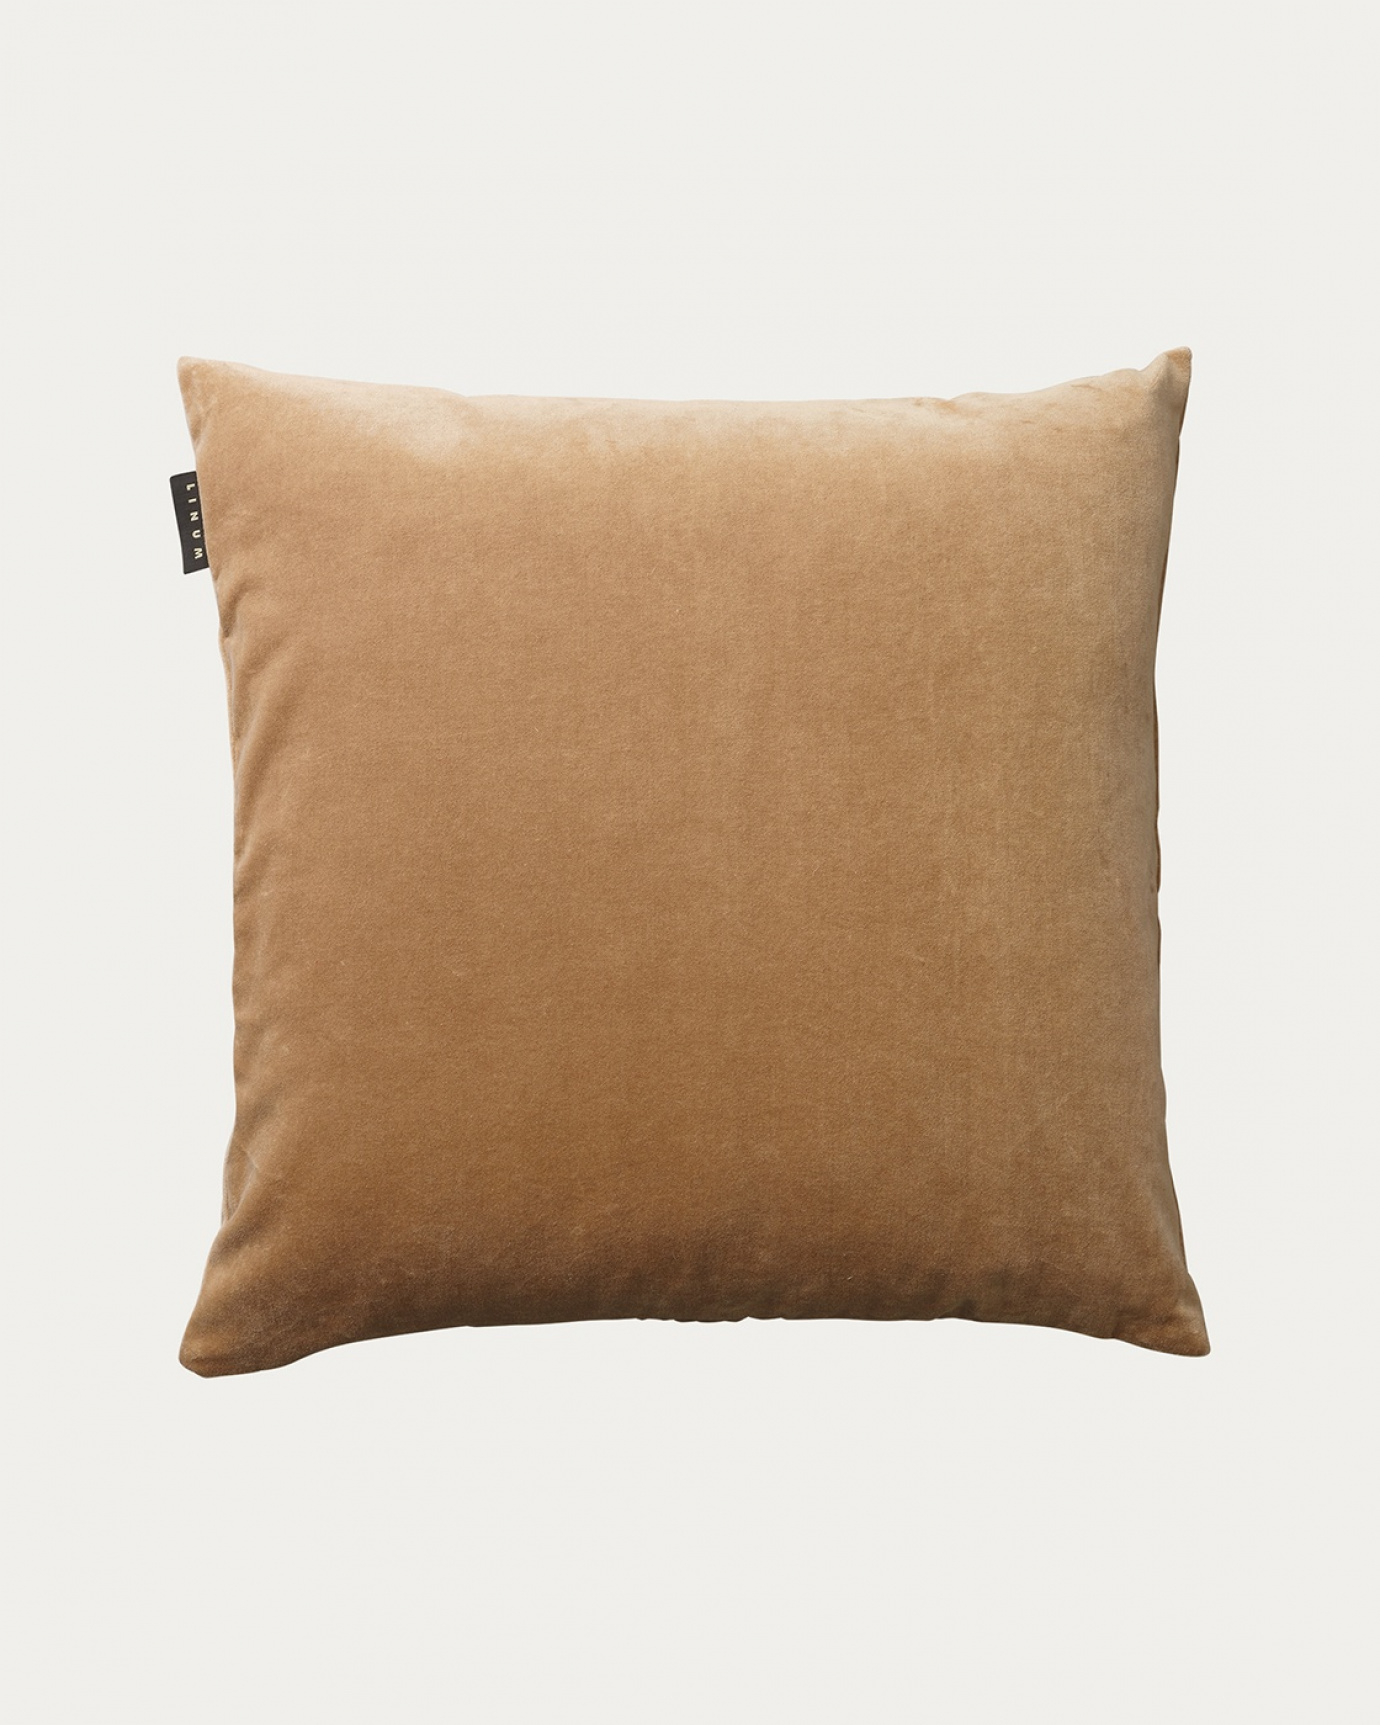 Product image camel brown PAOLO cushion cover in soft cotton velvet from LINUM DESIGN. Size 50x50 cm.